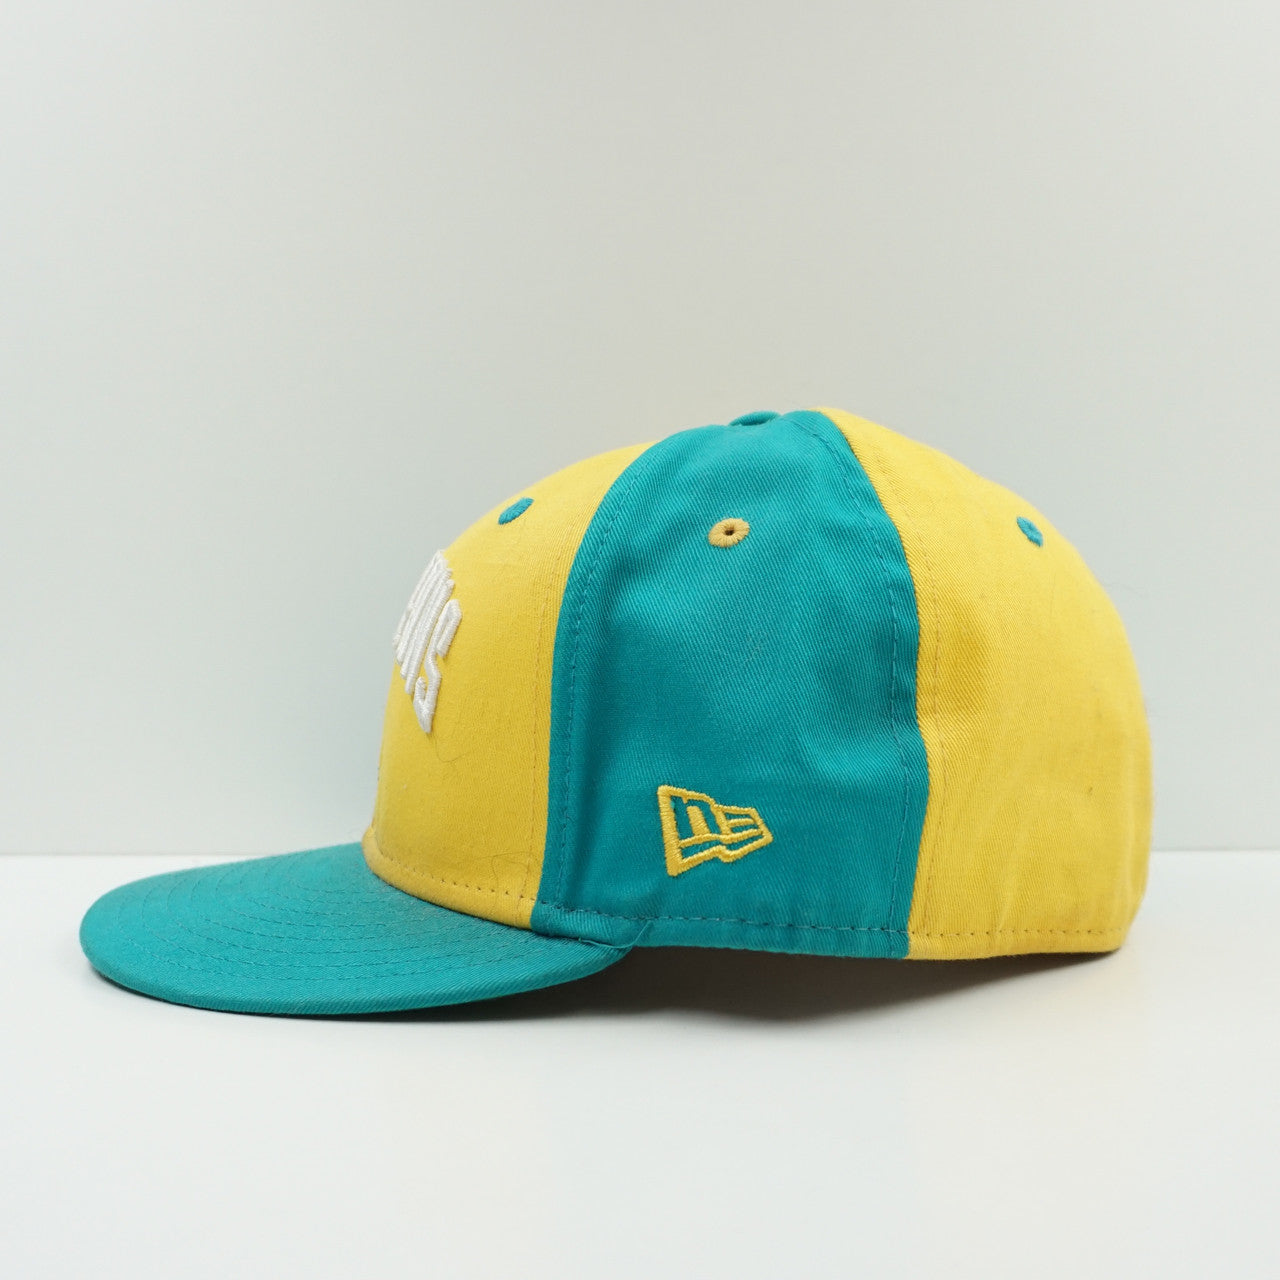 New Era New Orleans 3 Fitted Cap